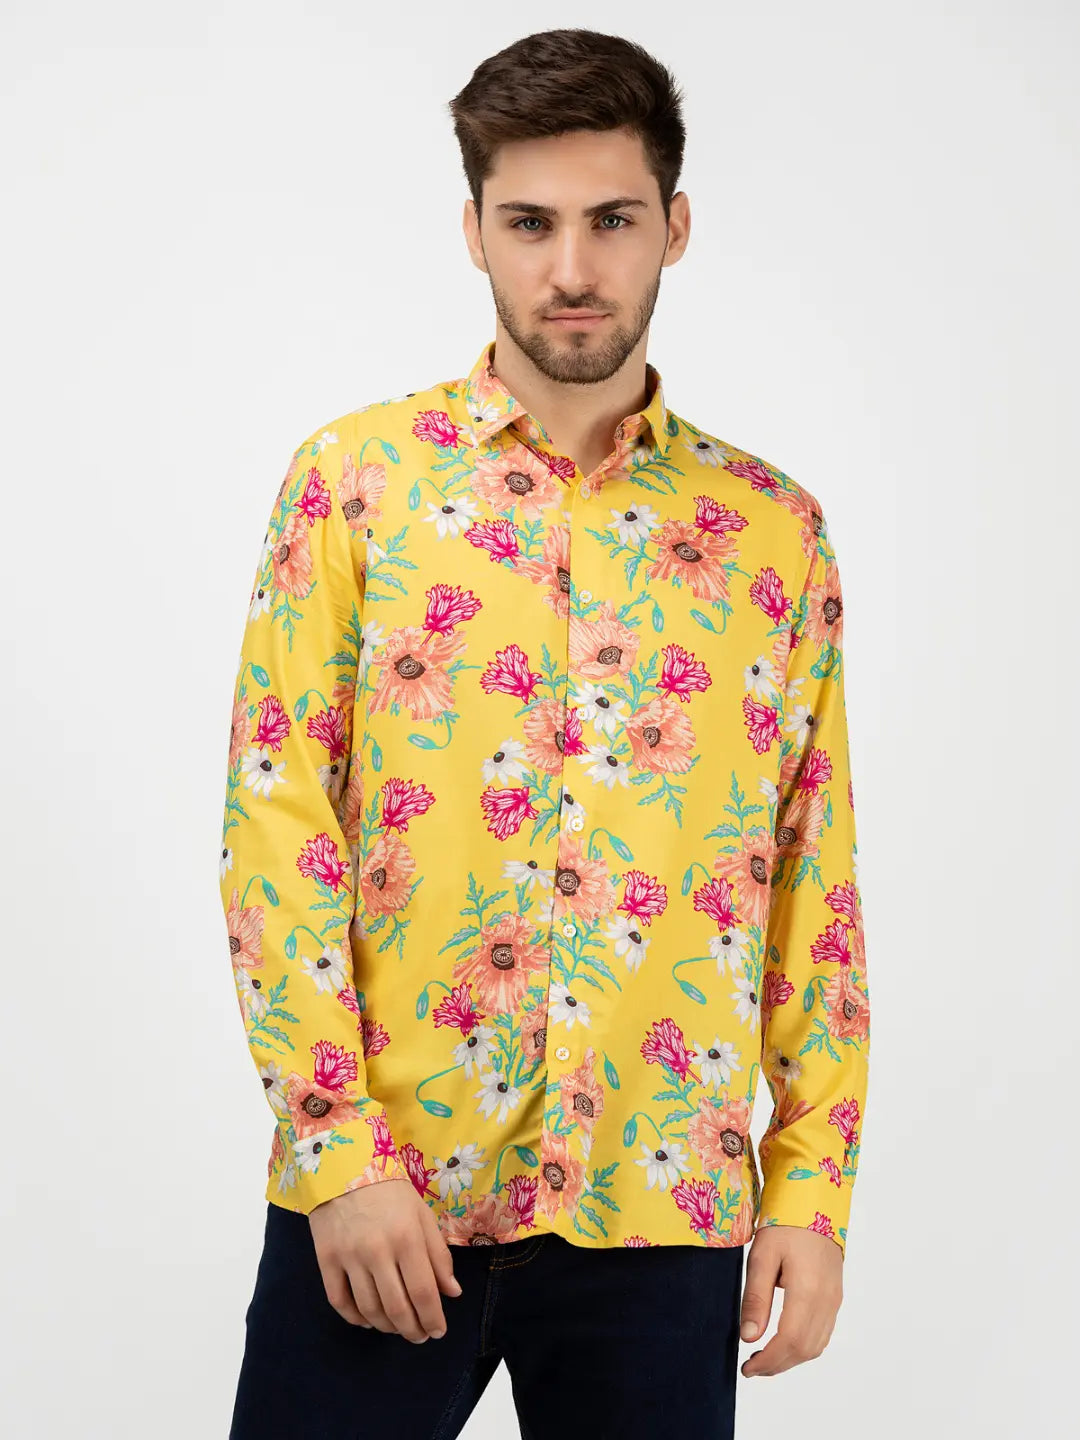 Men’s Yellow Slim Fit Floral Full Sleeve Shirt for Casual Occasion